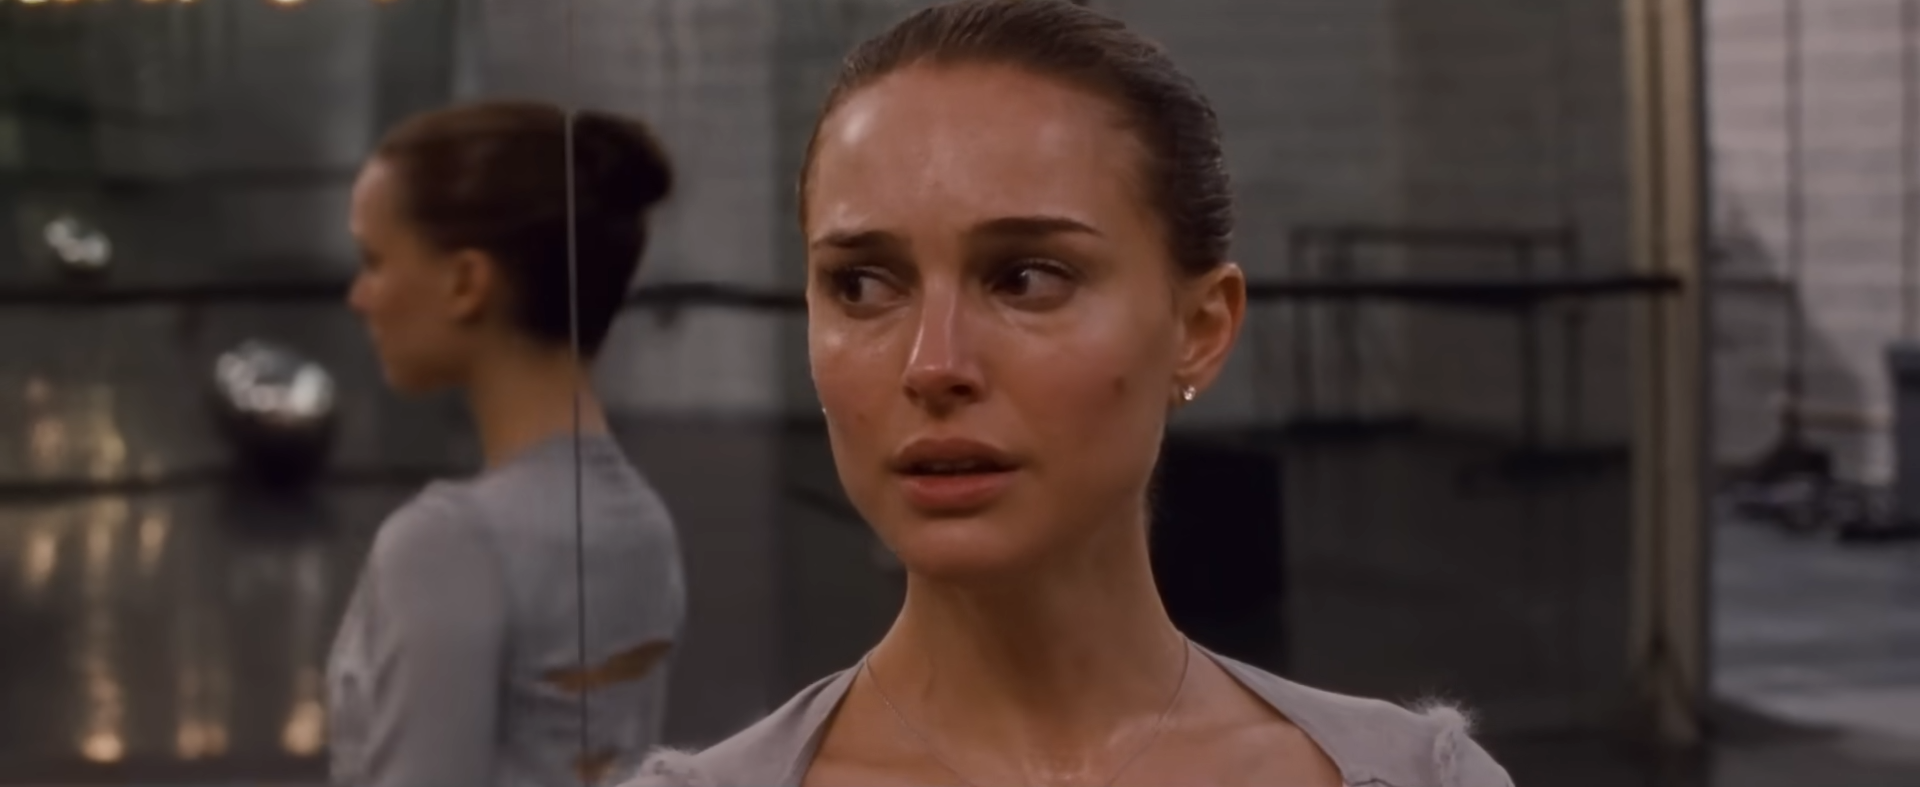 Nina from &quot;Black Swan&quot; is practicing in the dance studio, looking stressed